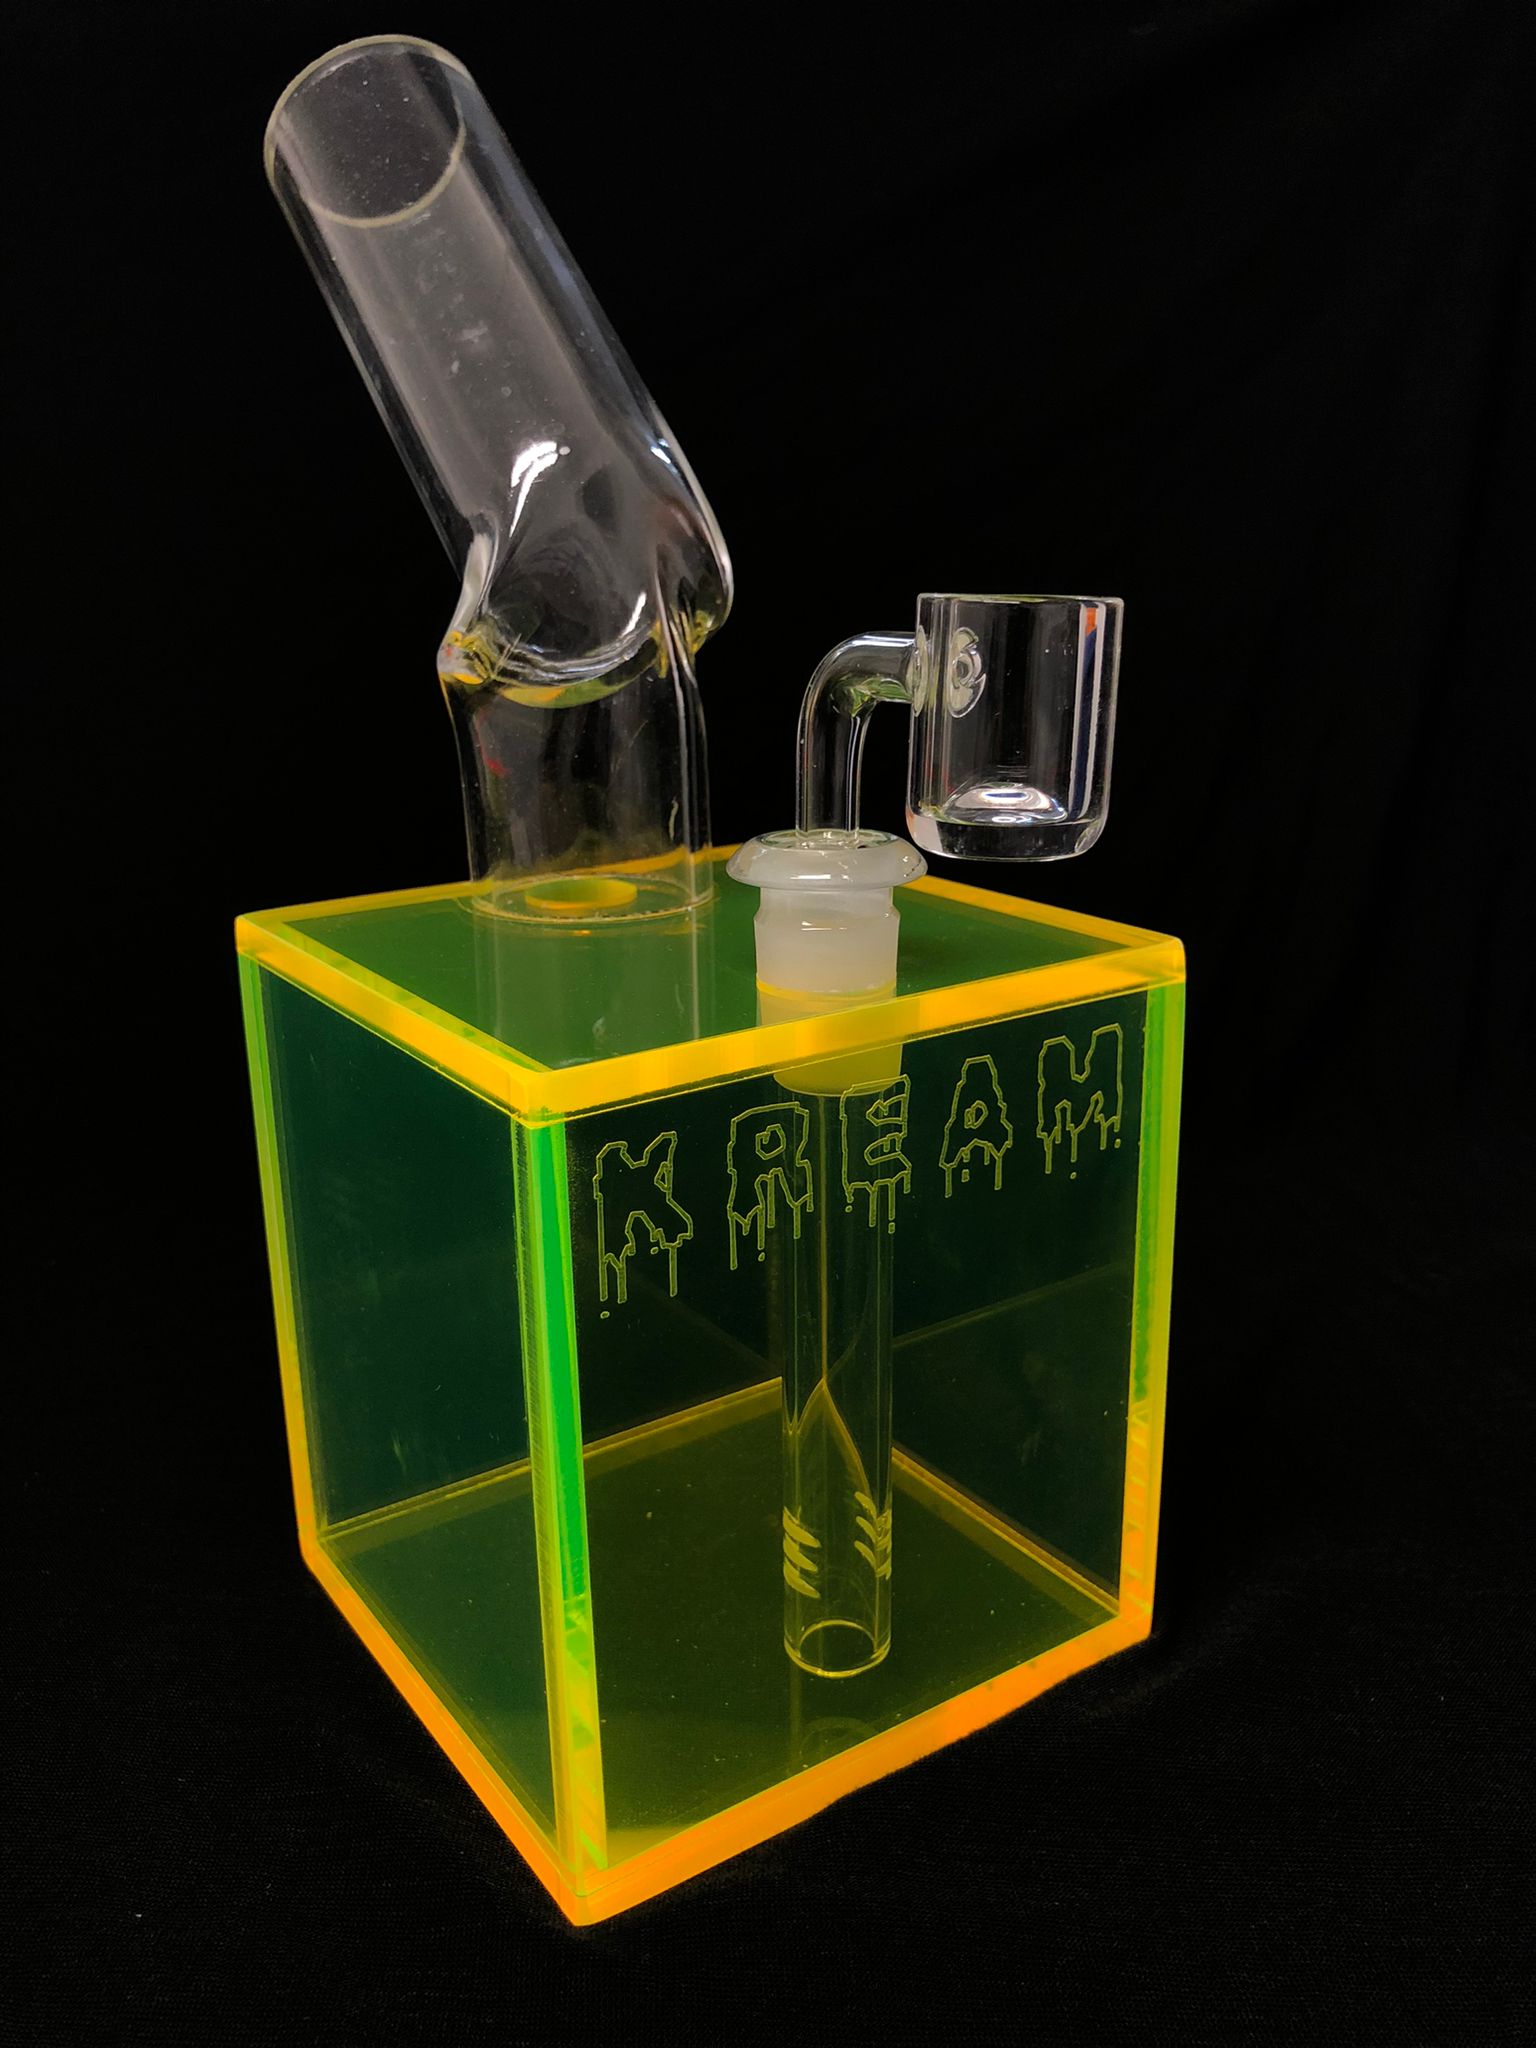 K.R.E.A.M. Exclusive Water Pipe